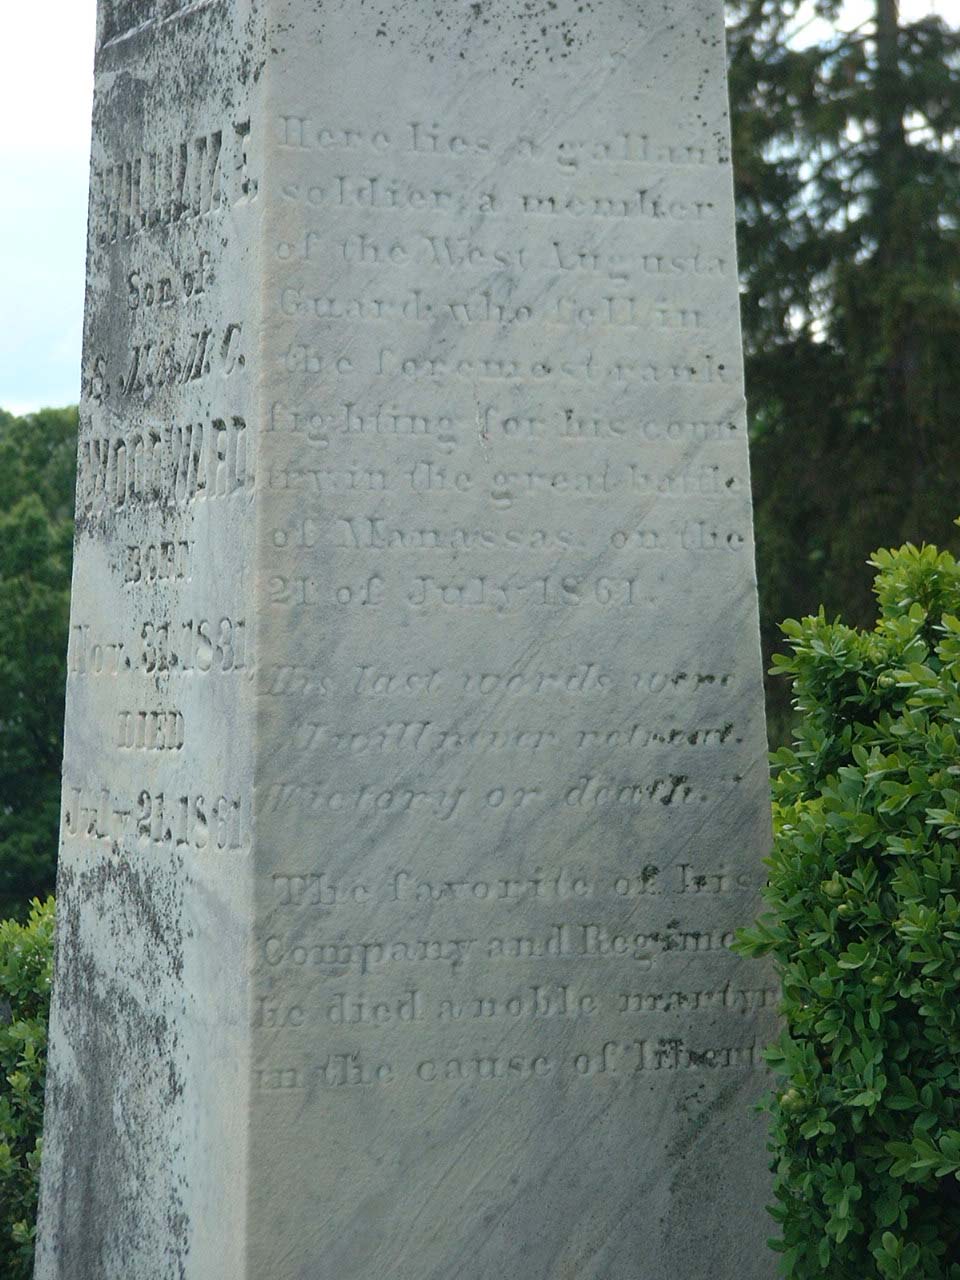 Inscriptions on a monument to William E. Woodward